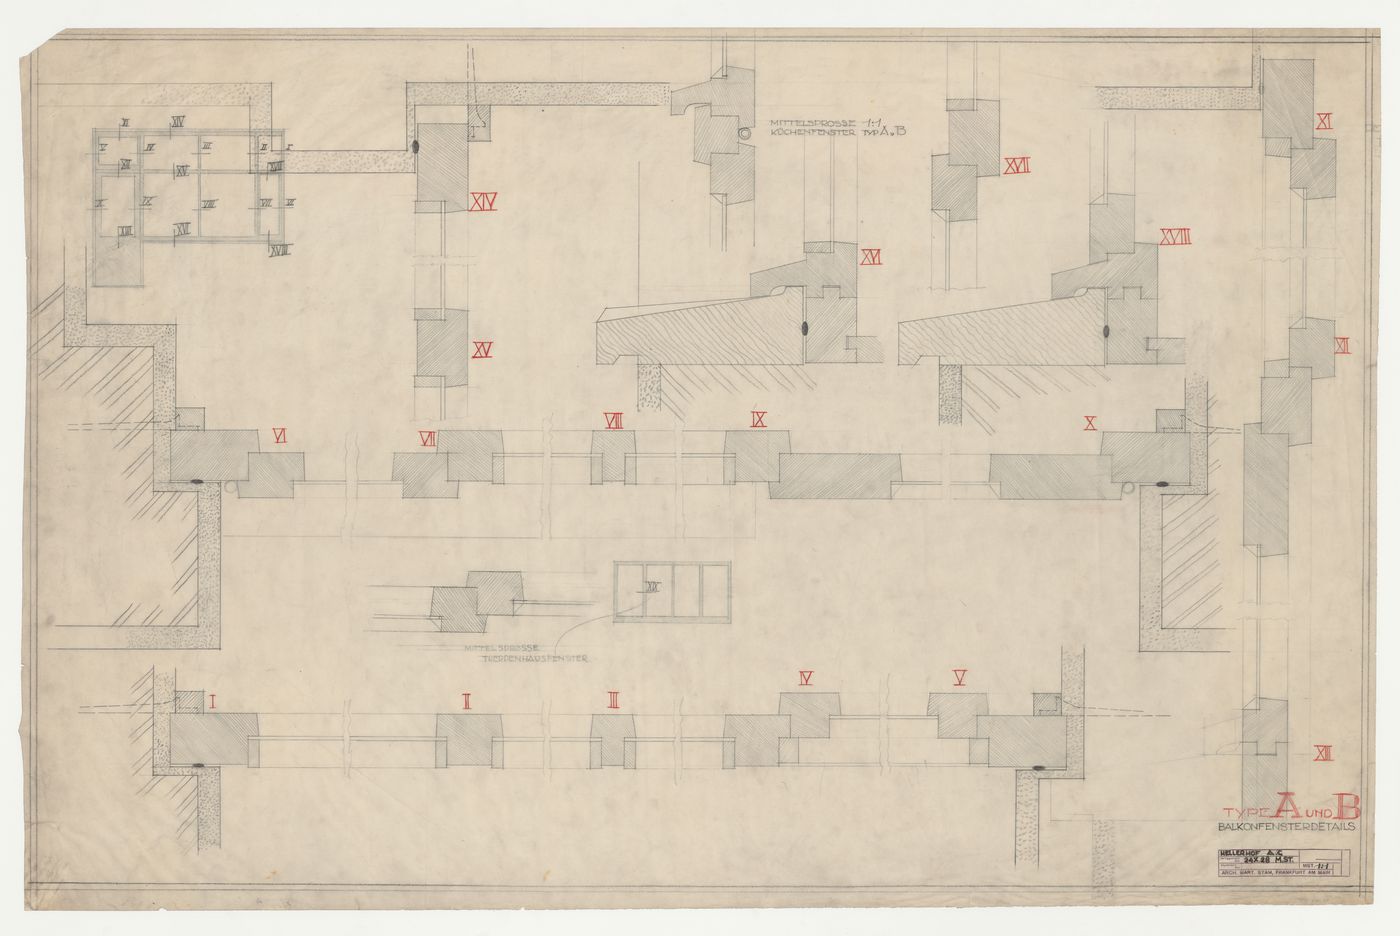 Plan and sectional details for windows for type A and type B housing units, Hellerhof Housing Estate, Frankfurt am Main, Germany